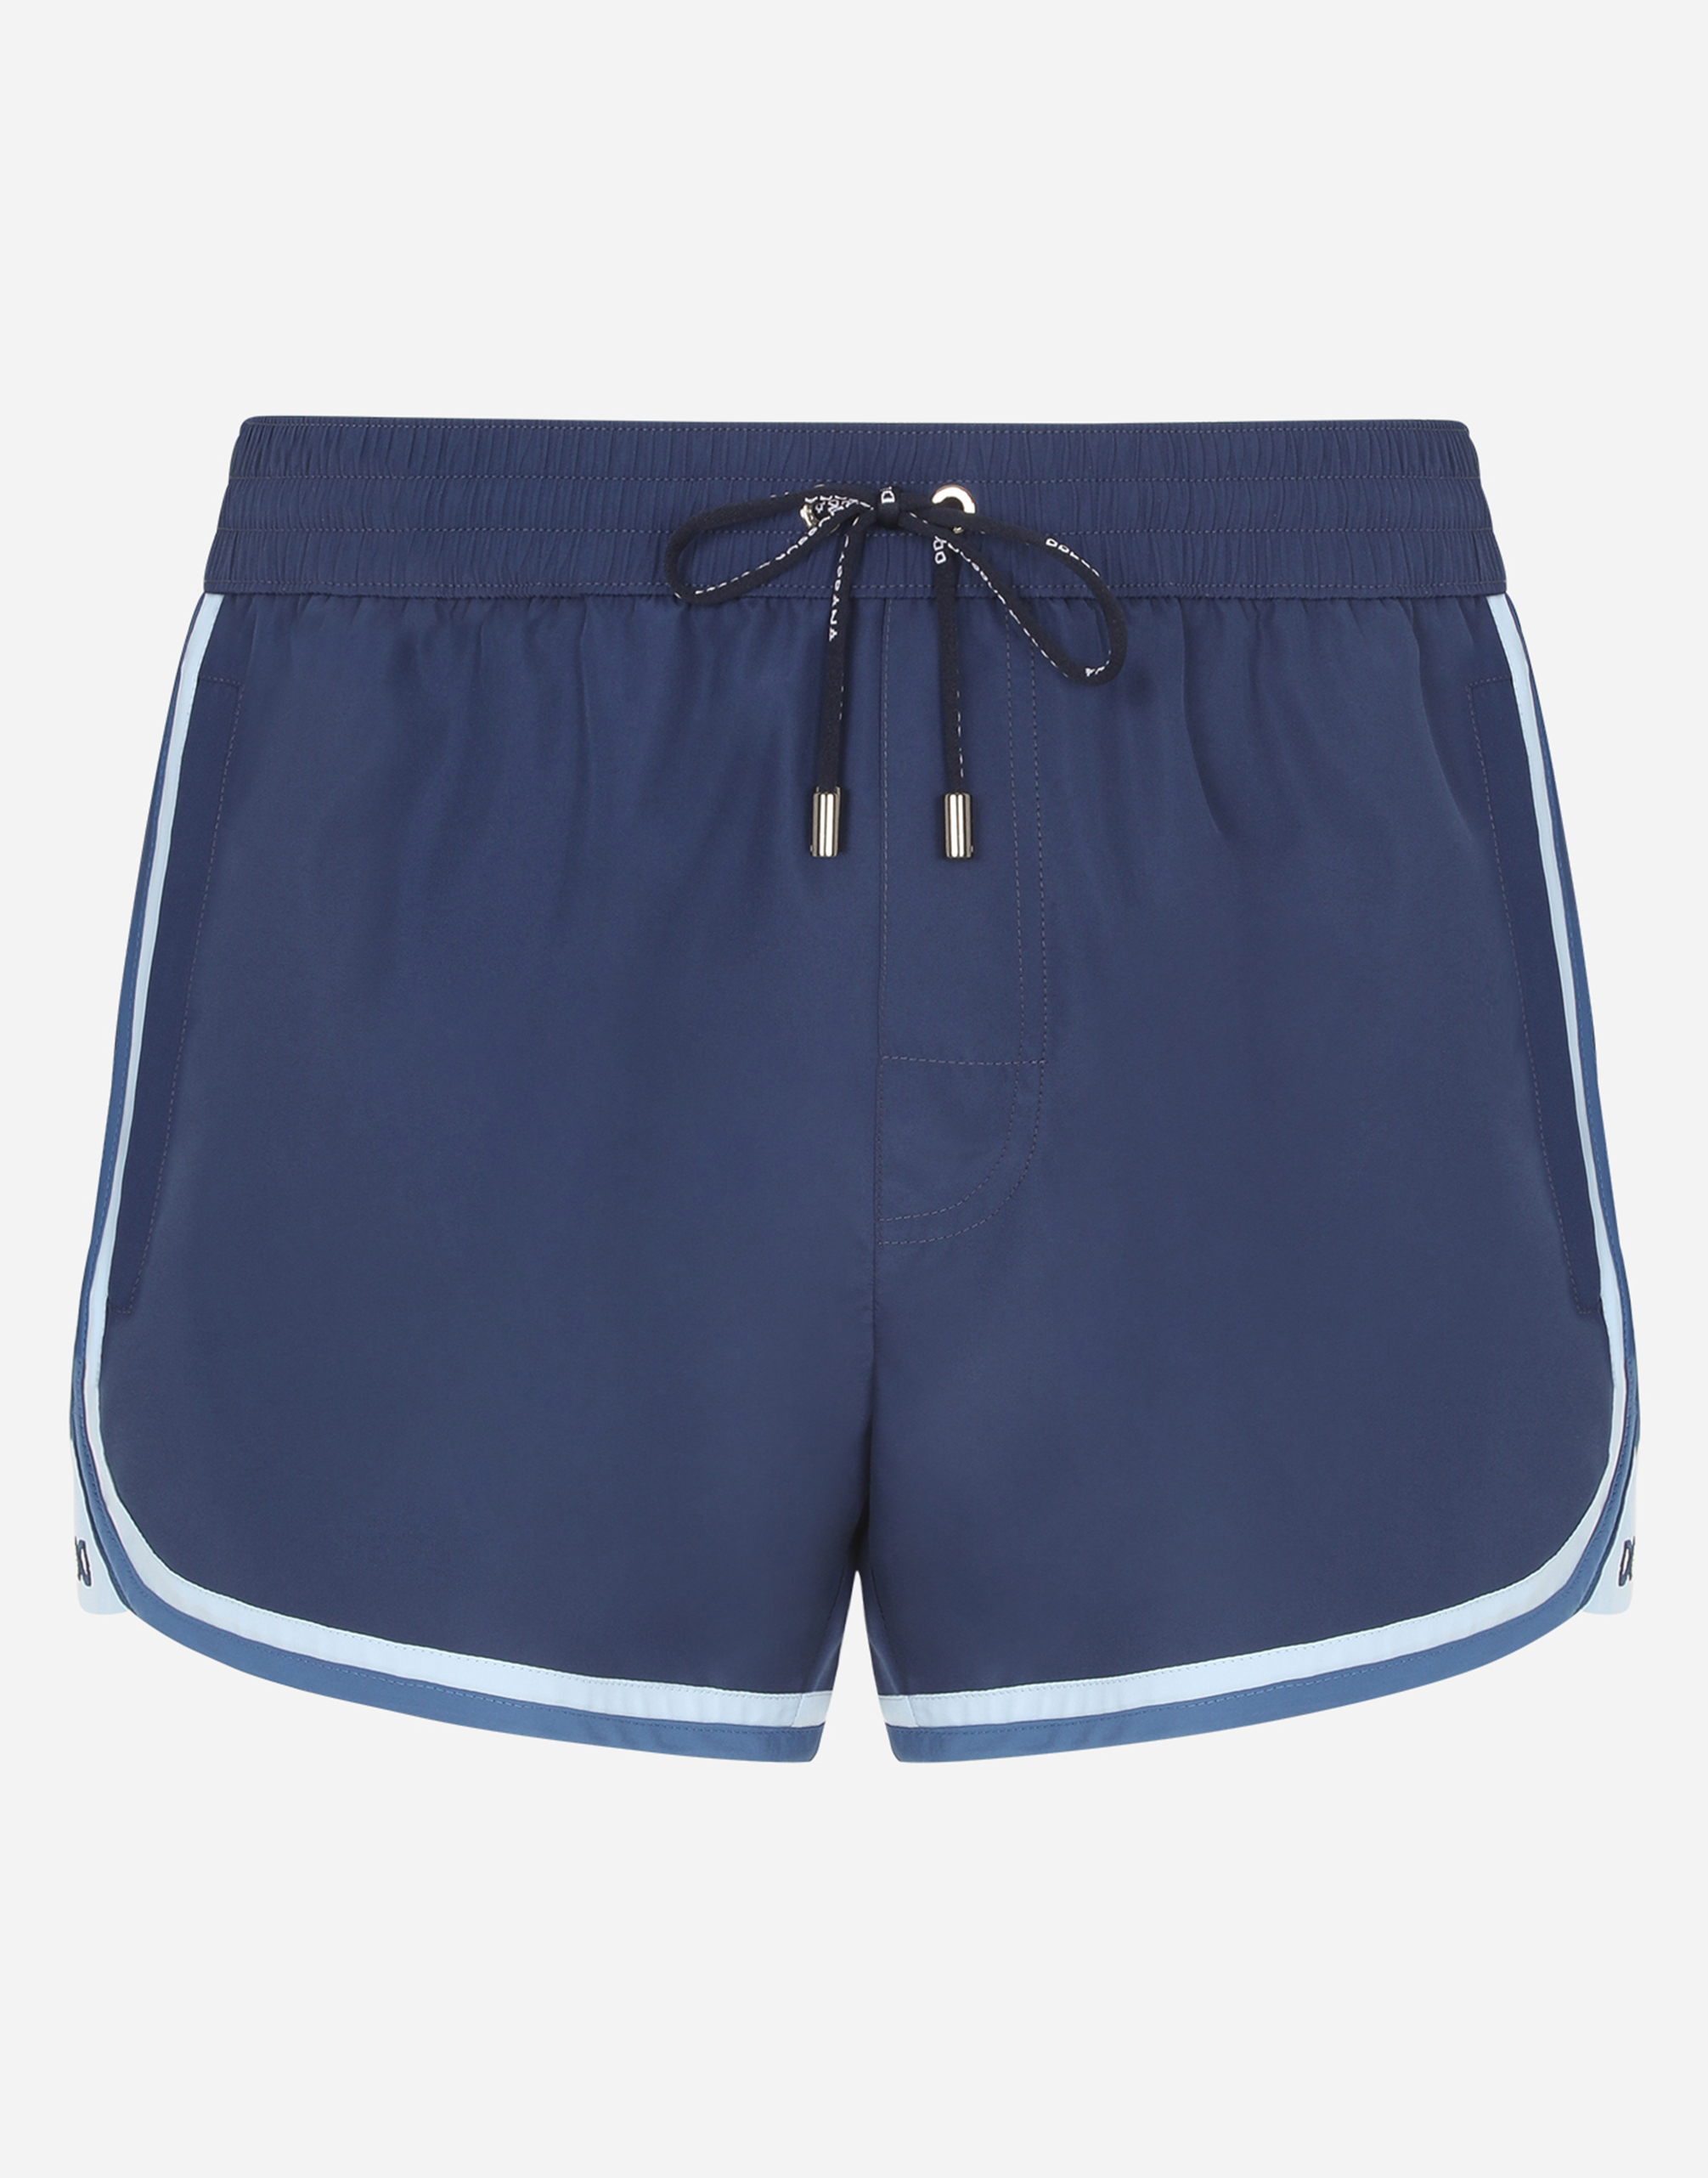 DOLCE & GABBANA SHORT SWIM TRUNKS WITH CONTRASTING-COLORED TRIMS